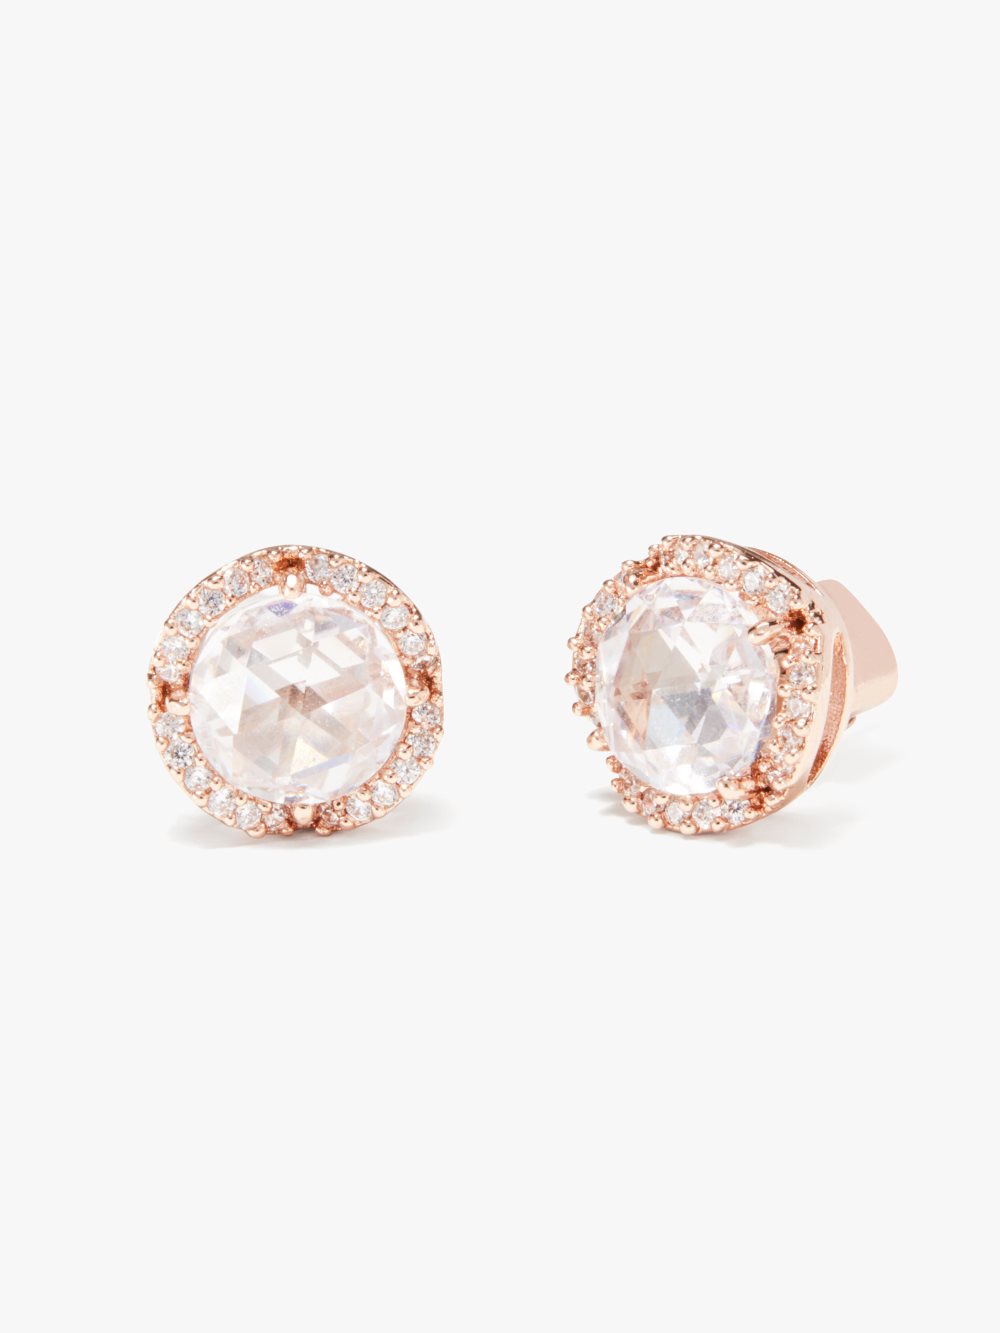 Women's clear/rose gold that sparkle pav